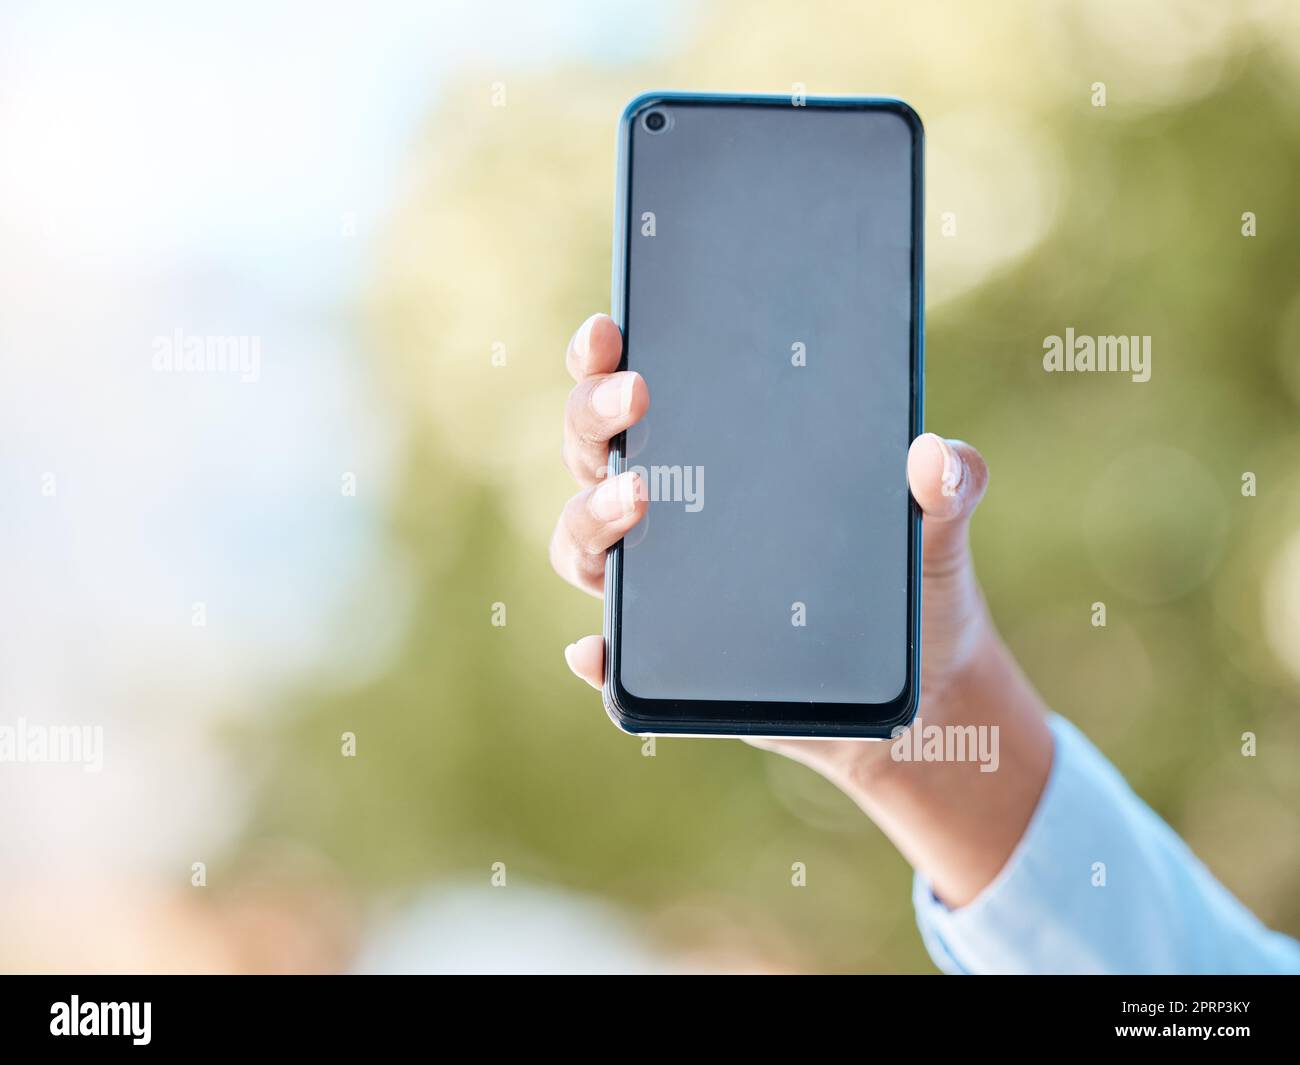 Hands, smartphone and presentation of mock up for digital app notification online with 5g tech. Person showing email, update glitch or social media communication response on blank screen. Stock Photo